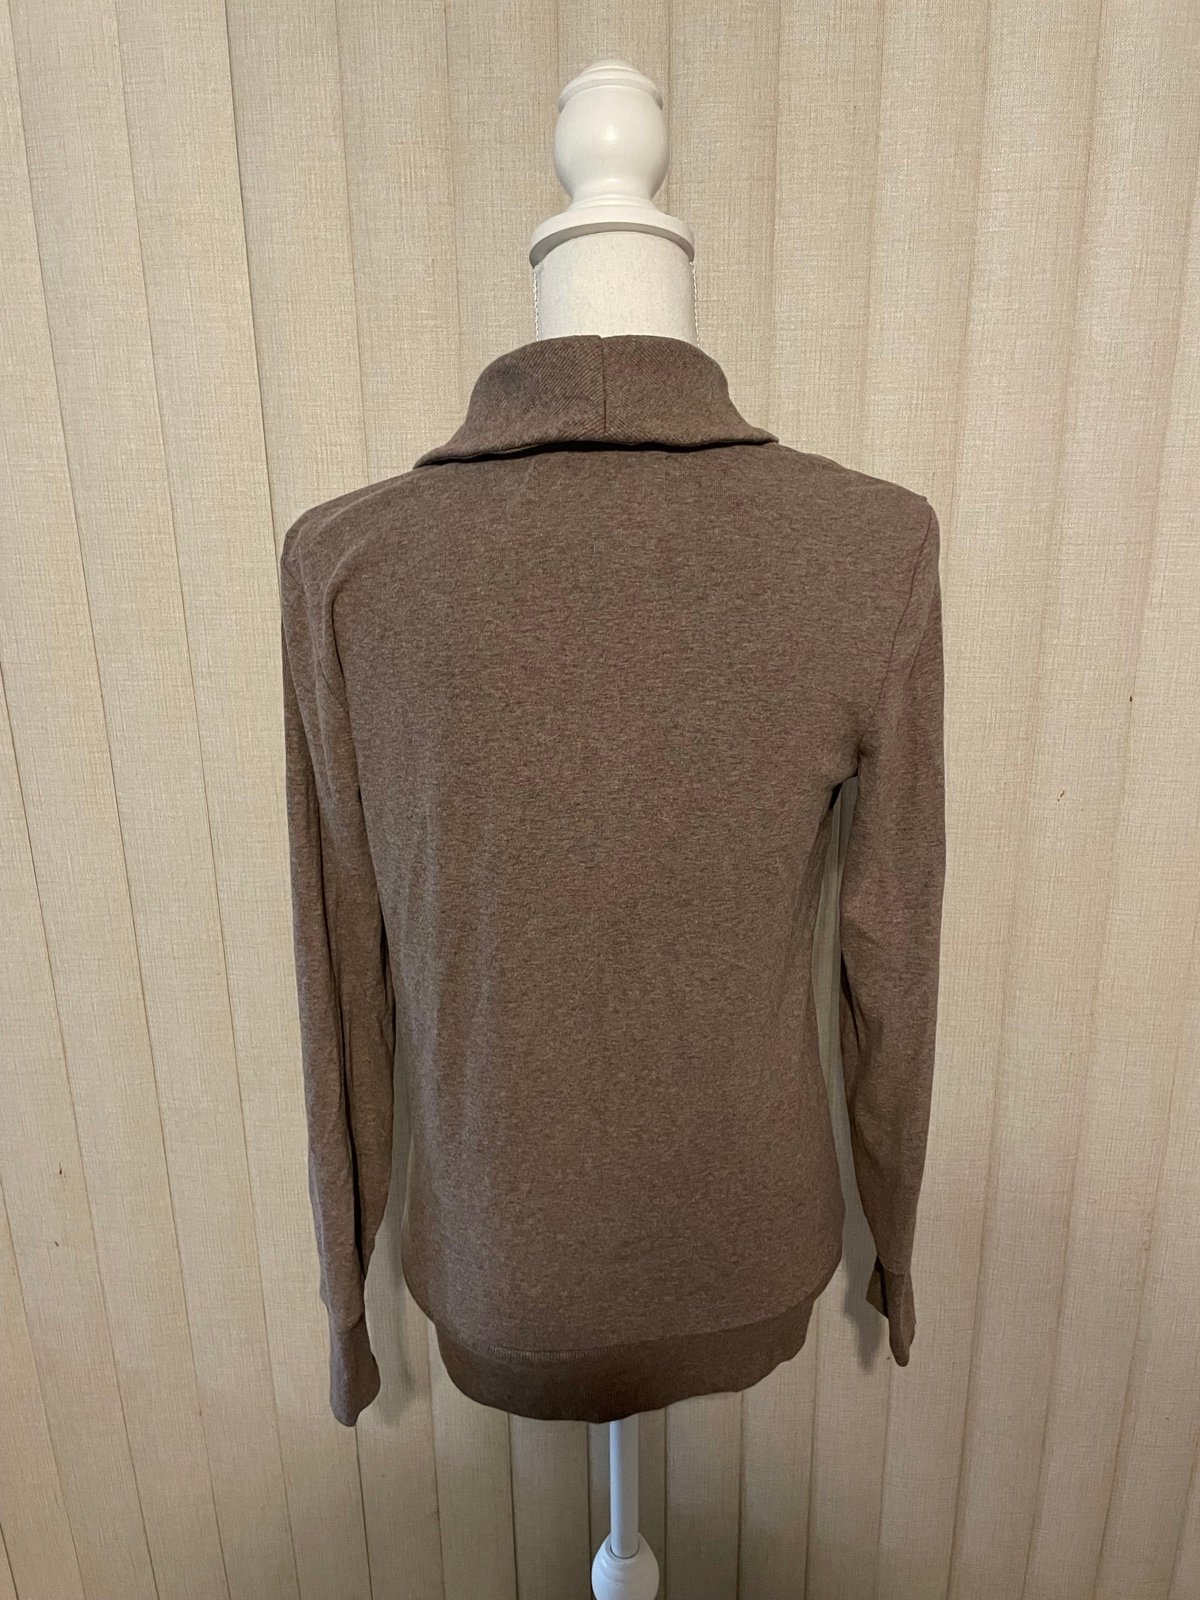 Simple Banana Republic Taupe Sweater Size S NZNz5FuDx Online Exclusive